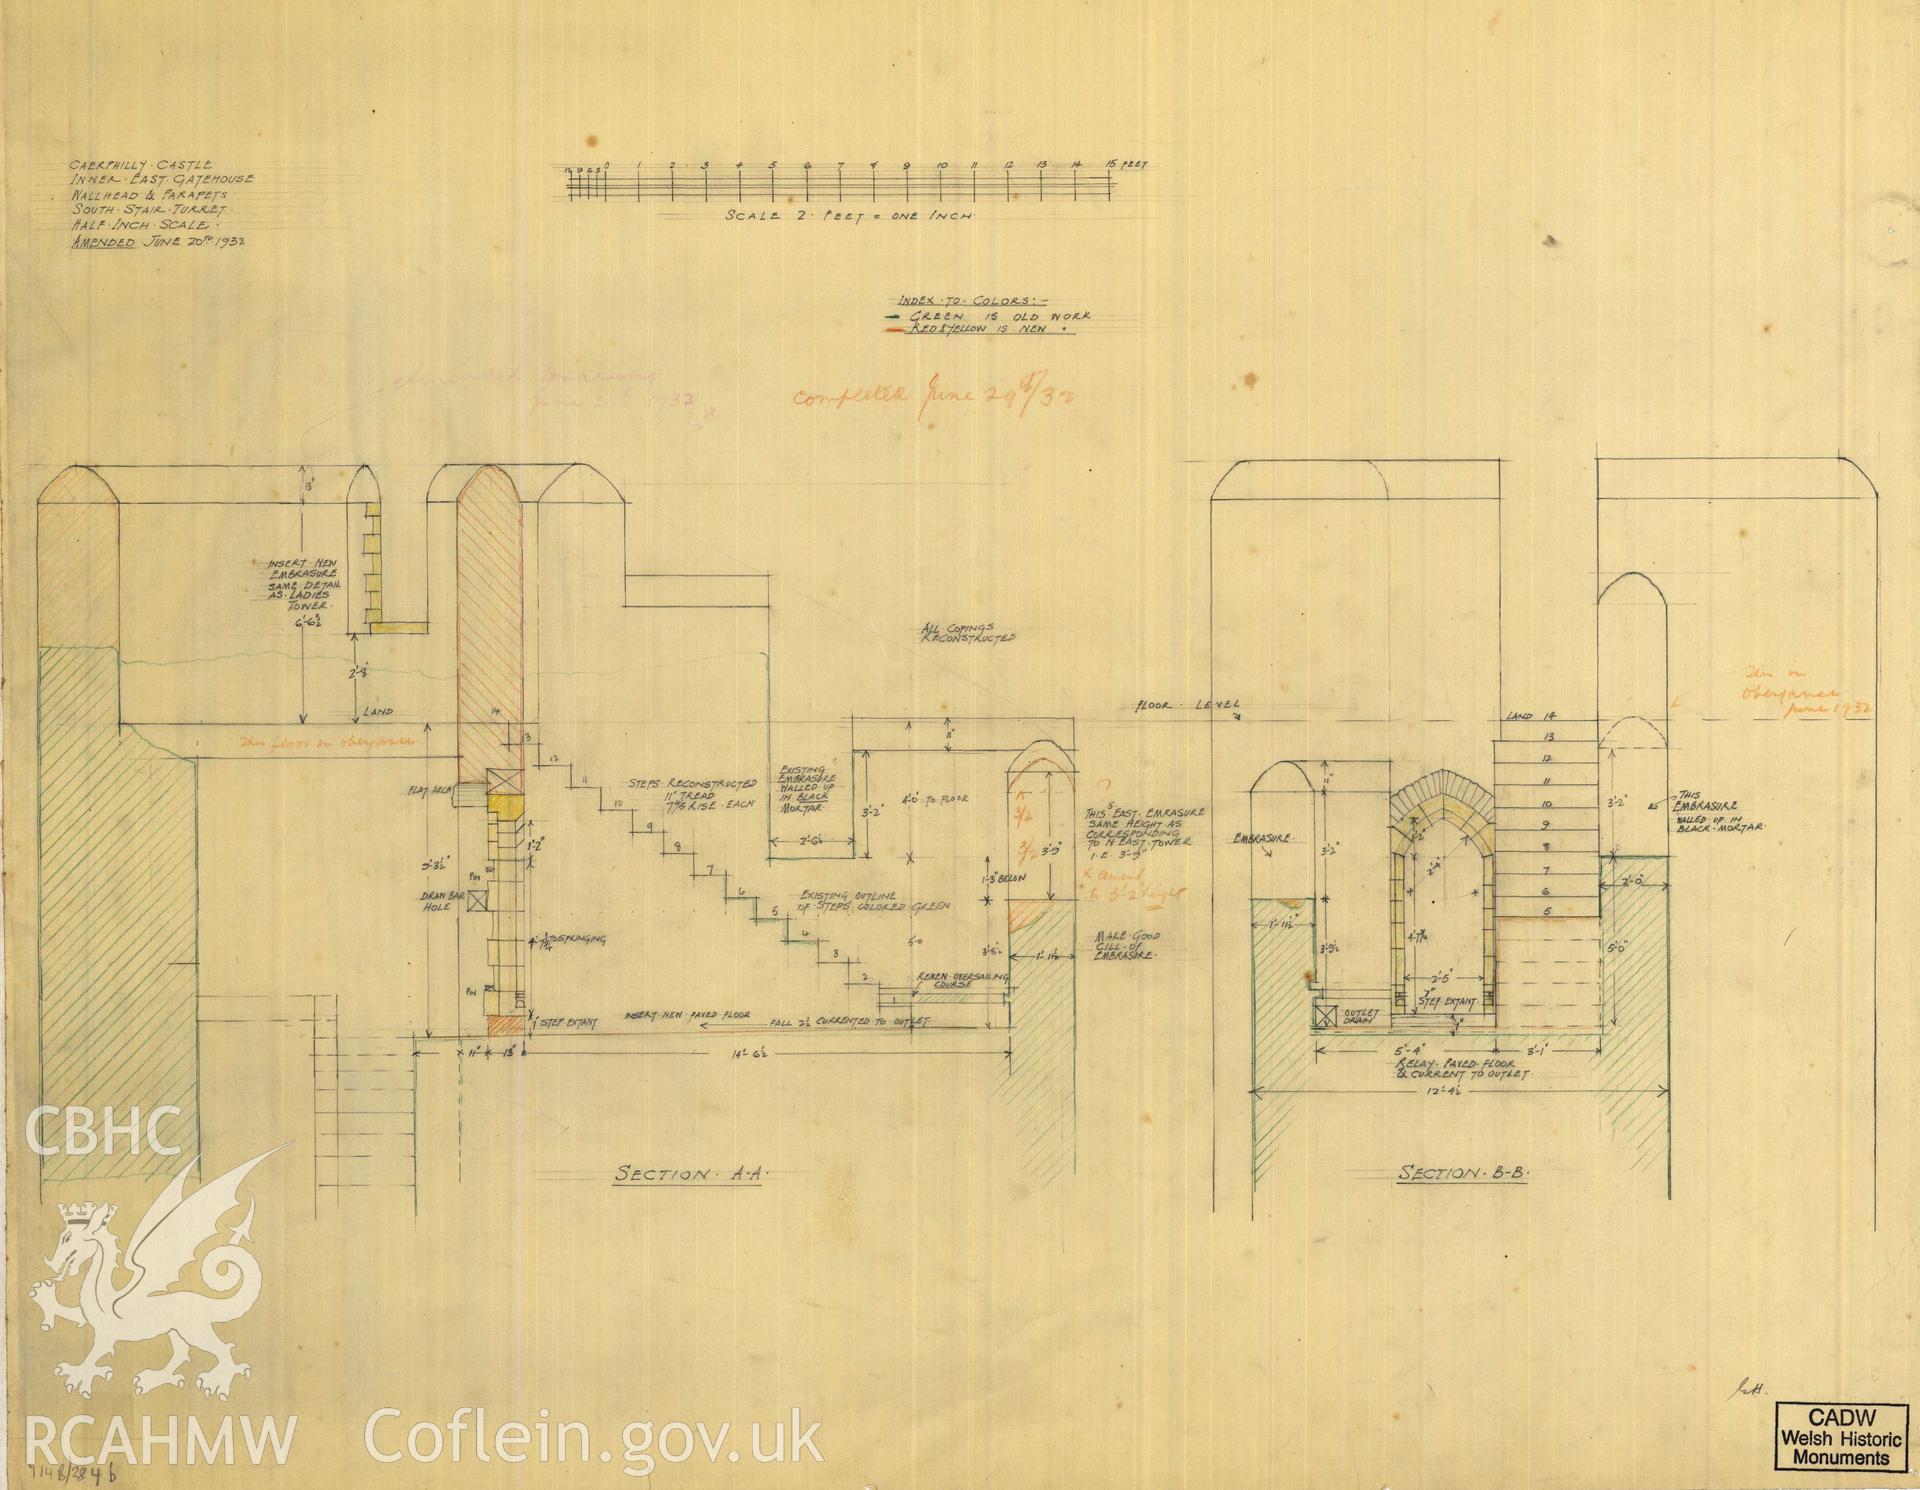 Cadw guardianship monument drawing of Caerphilly Castle. Inner E gate, S turret stairs. Cadw Ref. No:714B/284b. Scale 1:24.